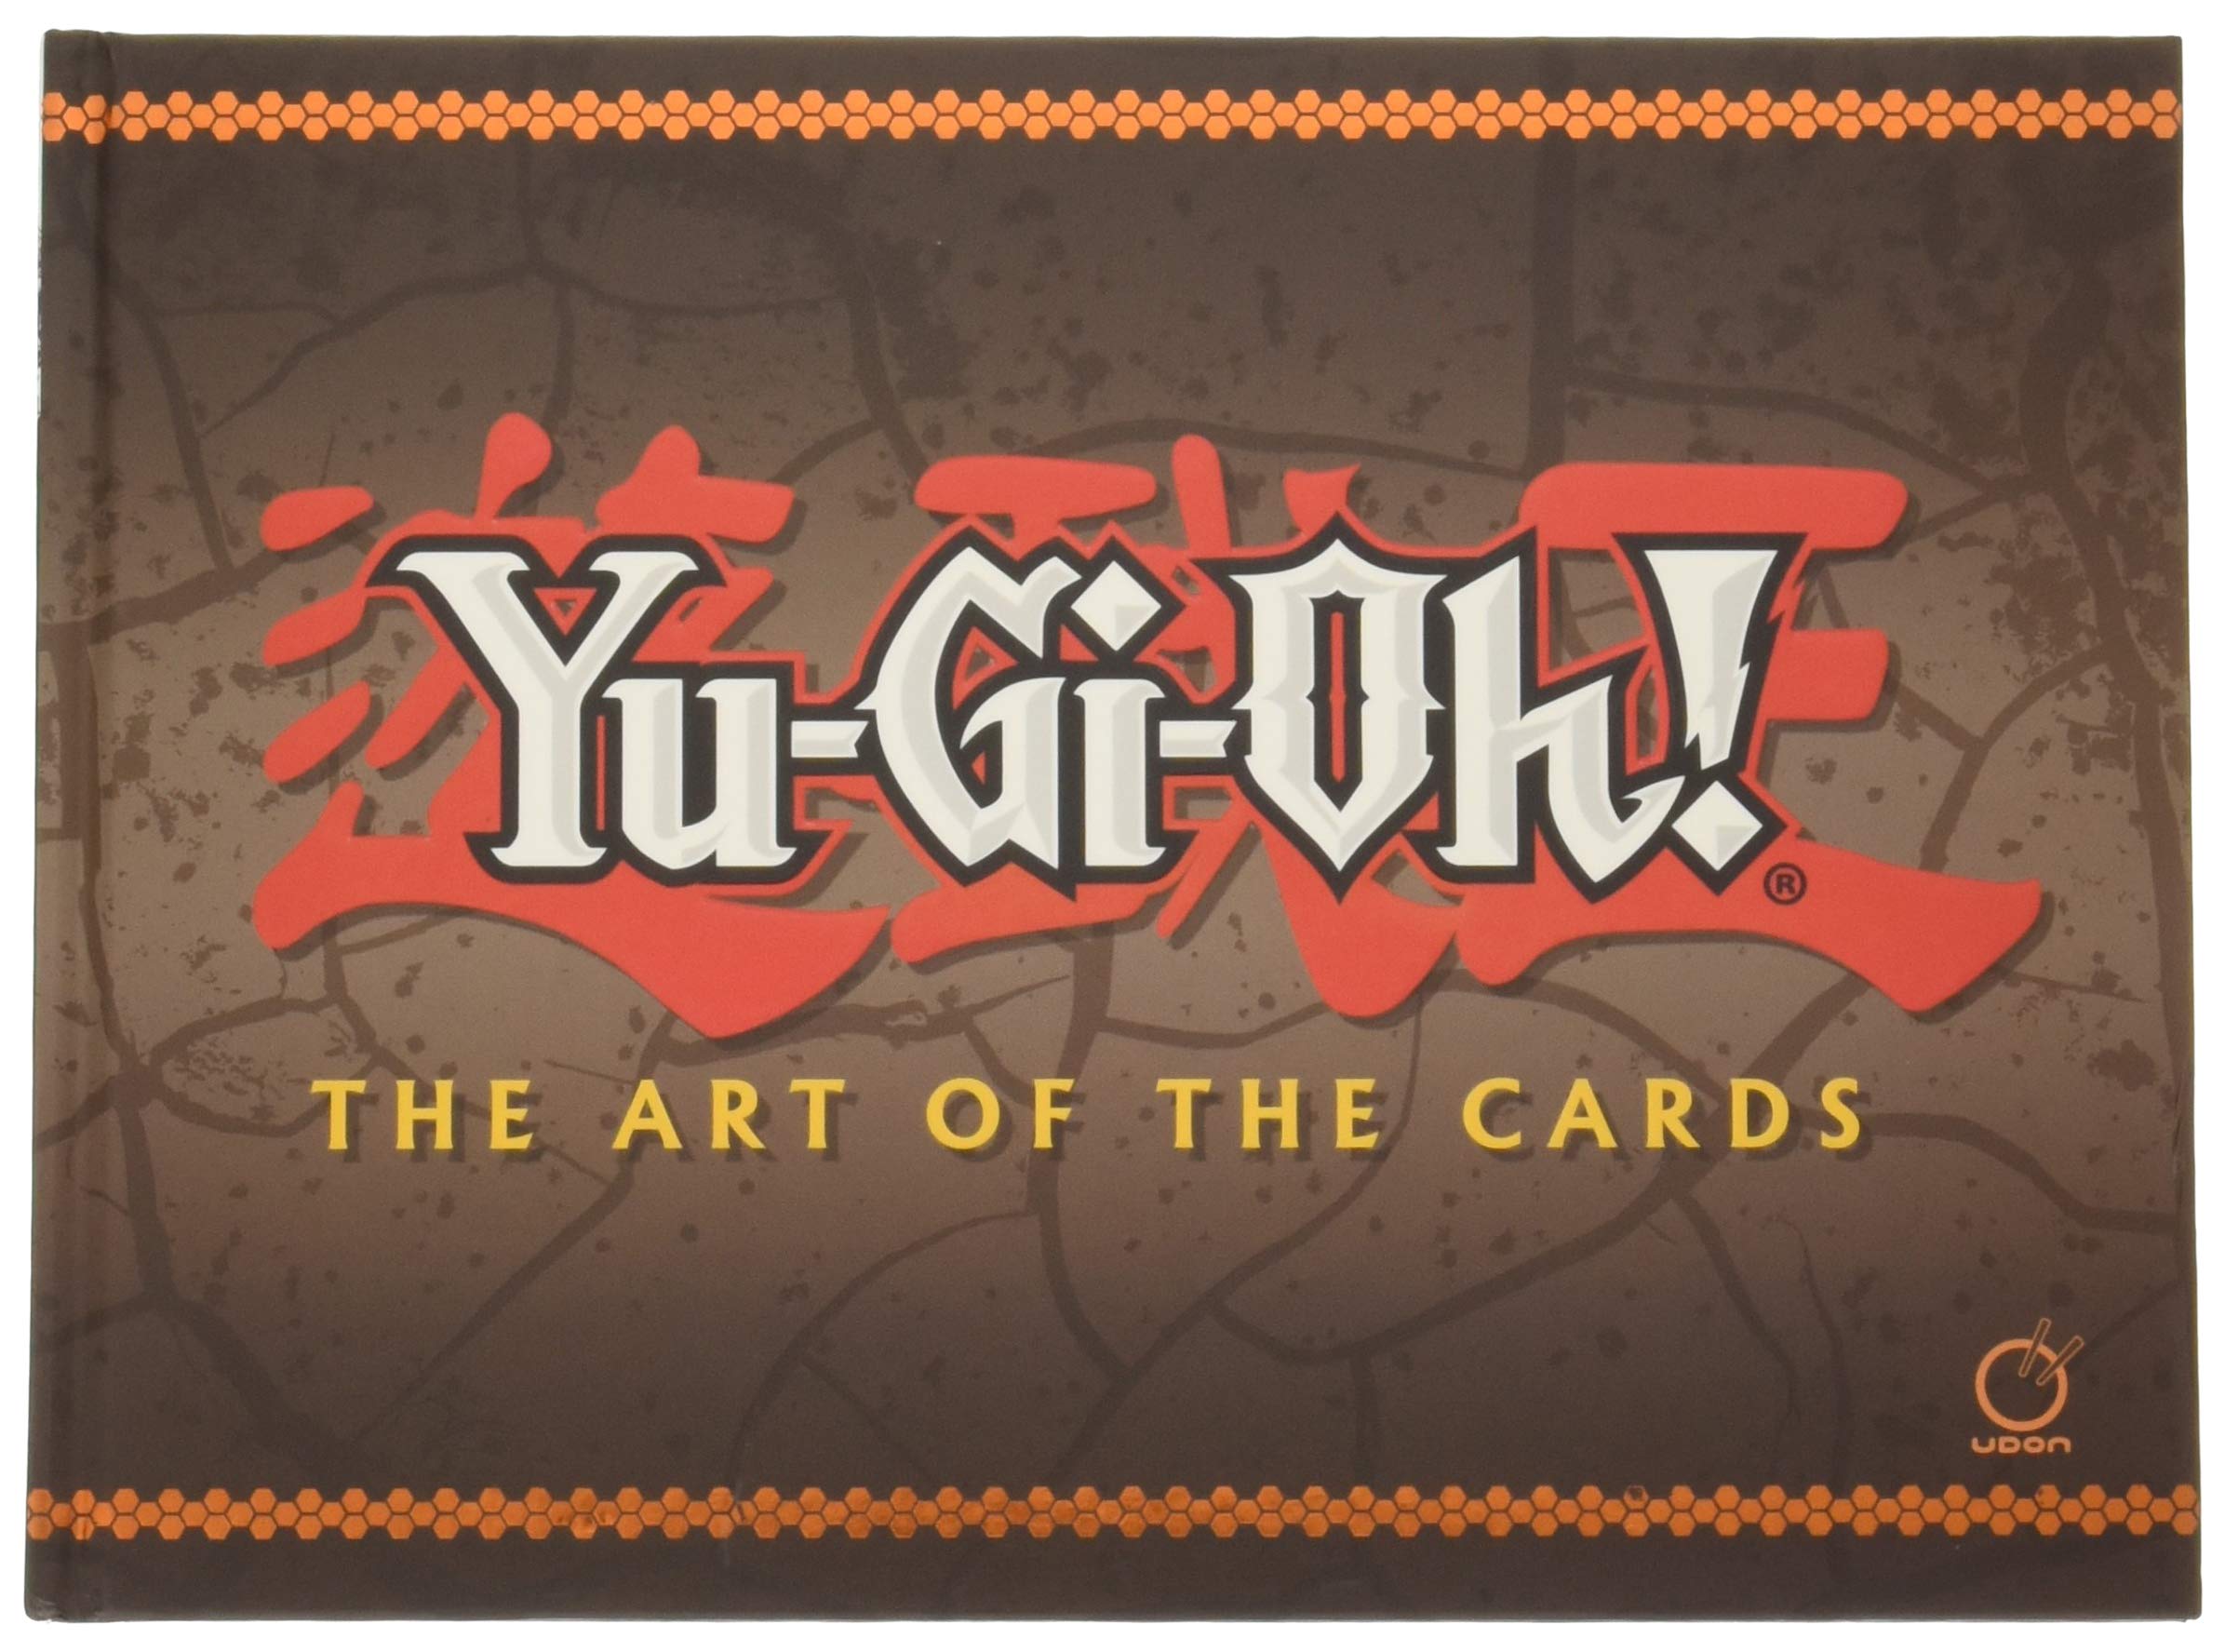 Yu-Gi-Oh! The Art of the Cards Book | Game Grid - Logan